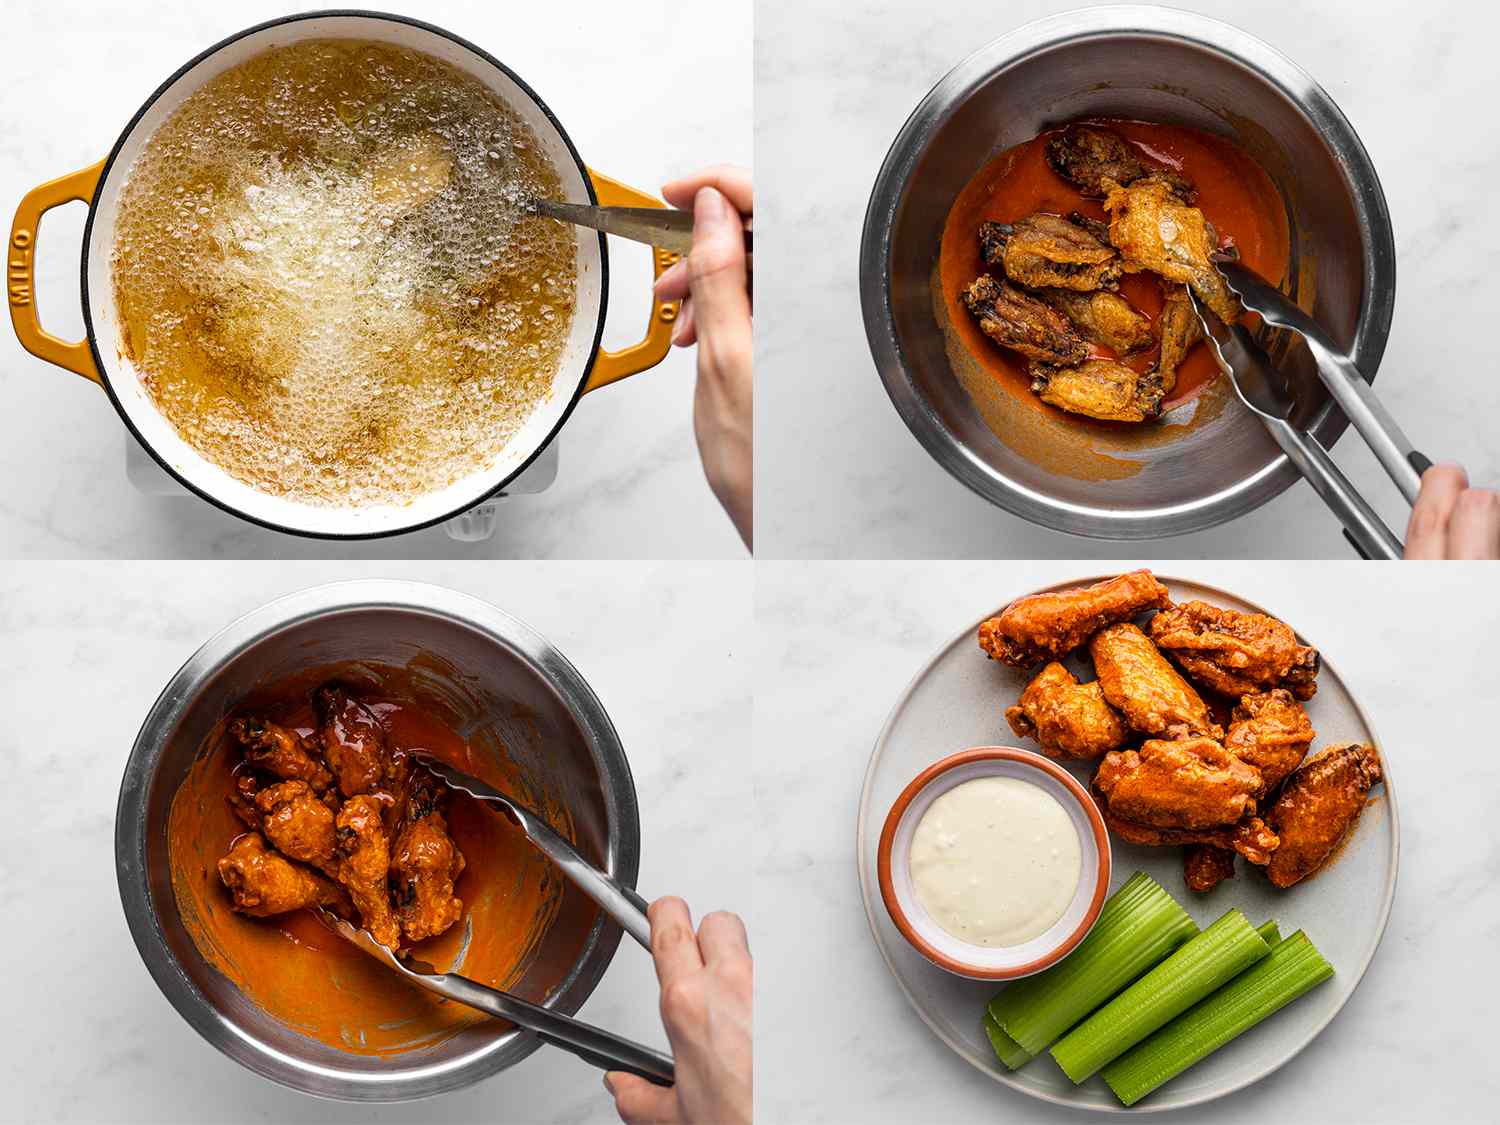 A horizontal four-image collage. The top left photo shows the par-cooked chicken wings being fried a second time in a dutch oven, with a metal spoon moving the chicken wings as the oil rapidly boils. The top right photo shows the fried chicken wings being tossed using tongs with buffalo sauce in a metal bowl. The bottom left photo shows the chicken wings coated in sauce, being moved around the bowl with a pair of metal tongs. The bottom right image shows the buffalo wings on a plate with sliced celery sticks and a small bowl of bleu cheese dressing, on a white stone background.